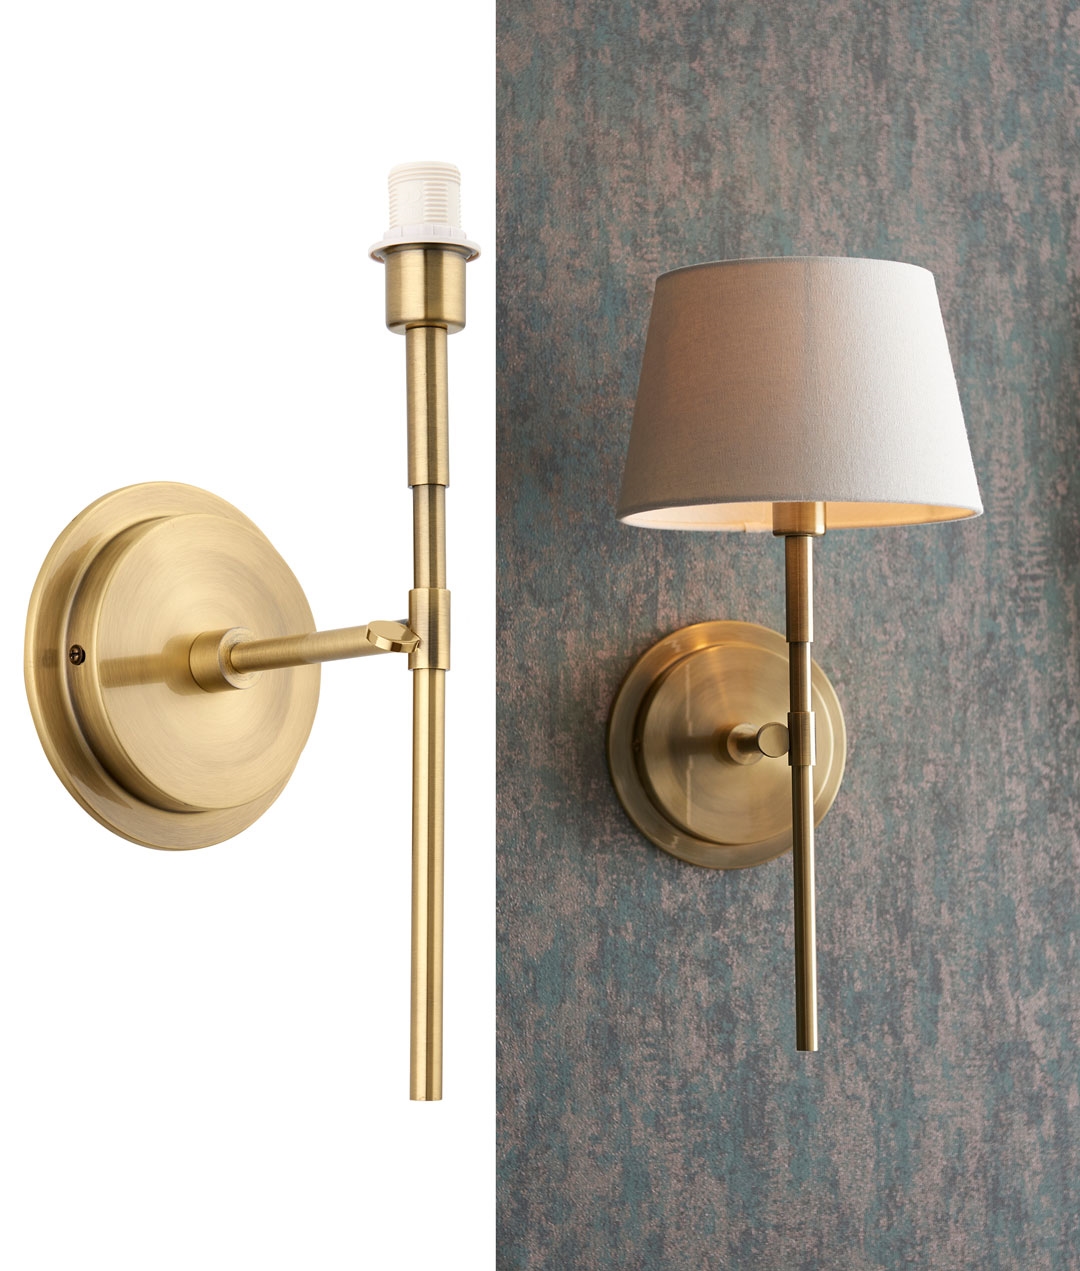 Antique Brass Slim Wall Light with Adjustable Stem and Optional Shade